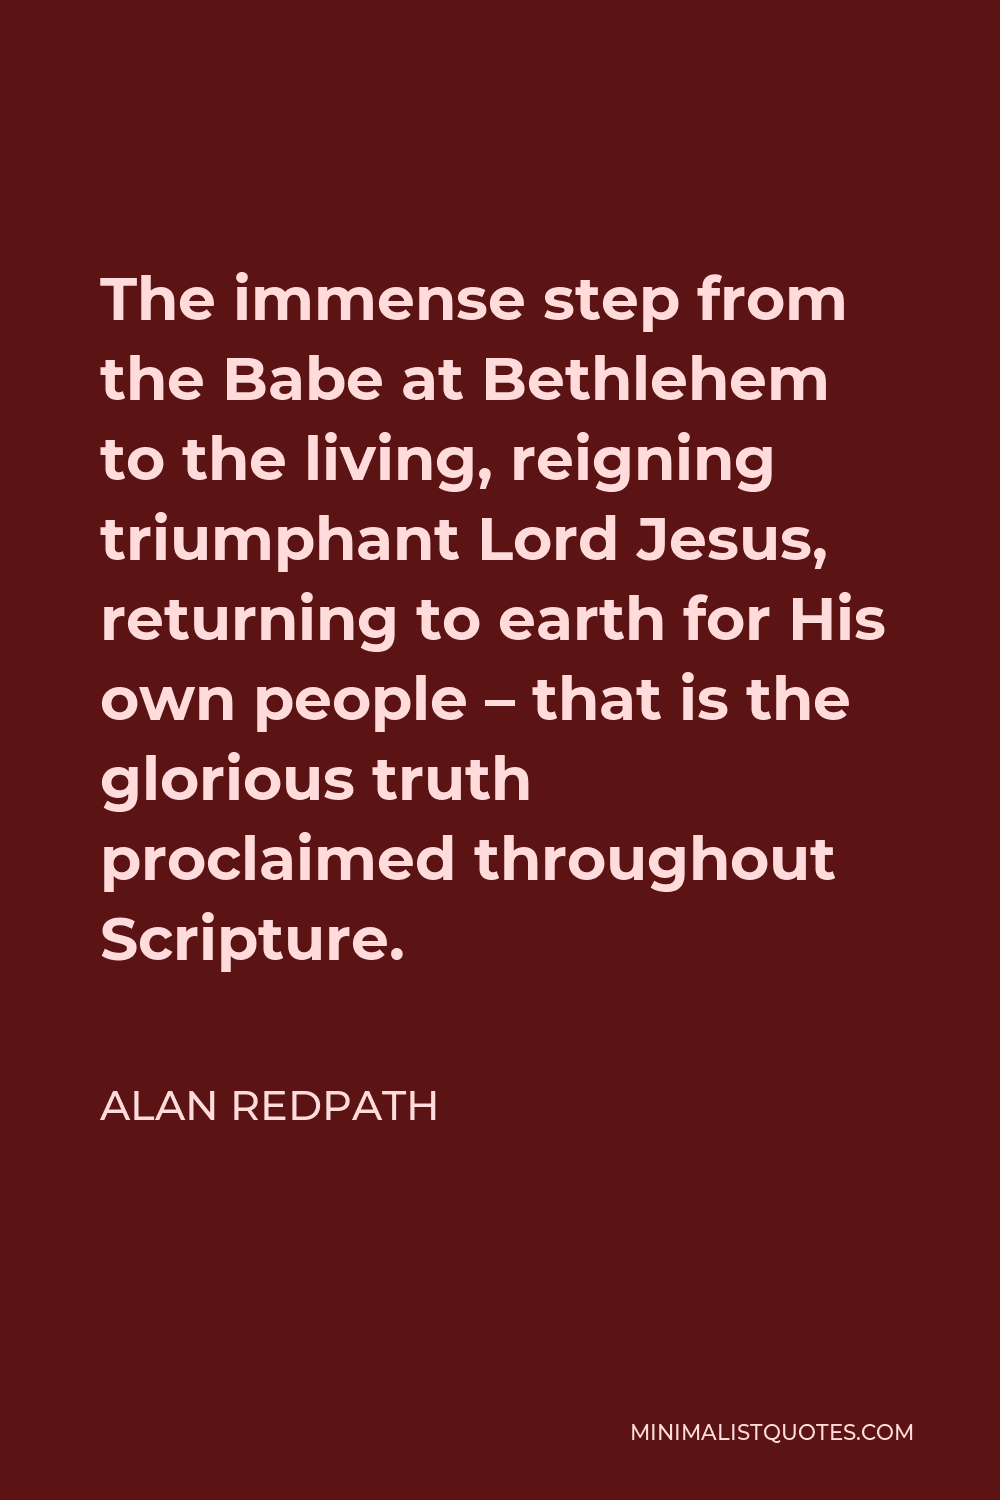 Alan Redpath Quote - The immense step from the Babe at Bethlehem to the living, reigning triumphant Lord Jesus, returning to earth for His own people – that is the glorious truth proclaimed throughout Scripture.